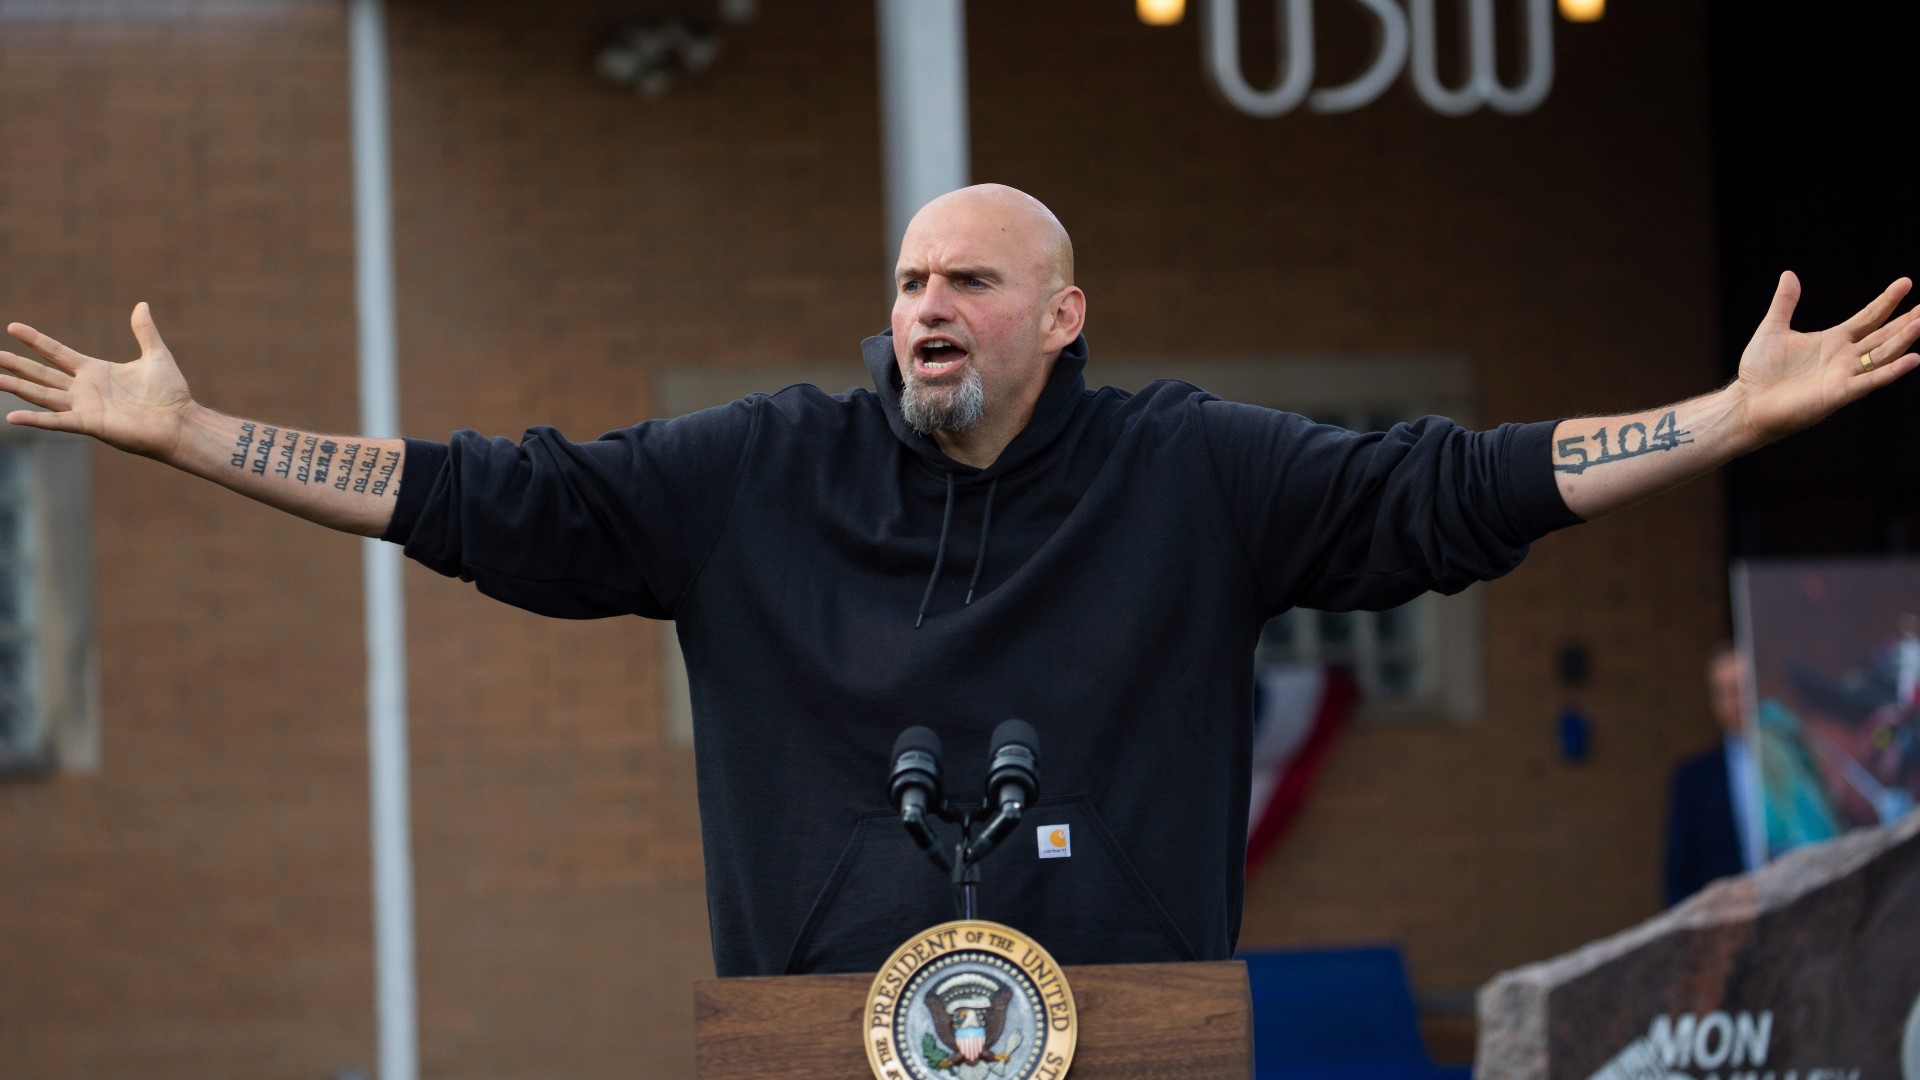 The campaign said Wednesday that Fetterman would participate in a televised debate in mid- to late October.